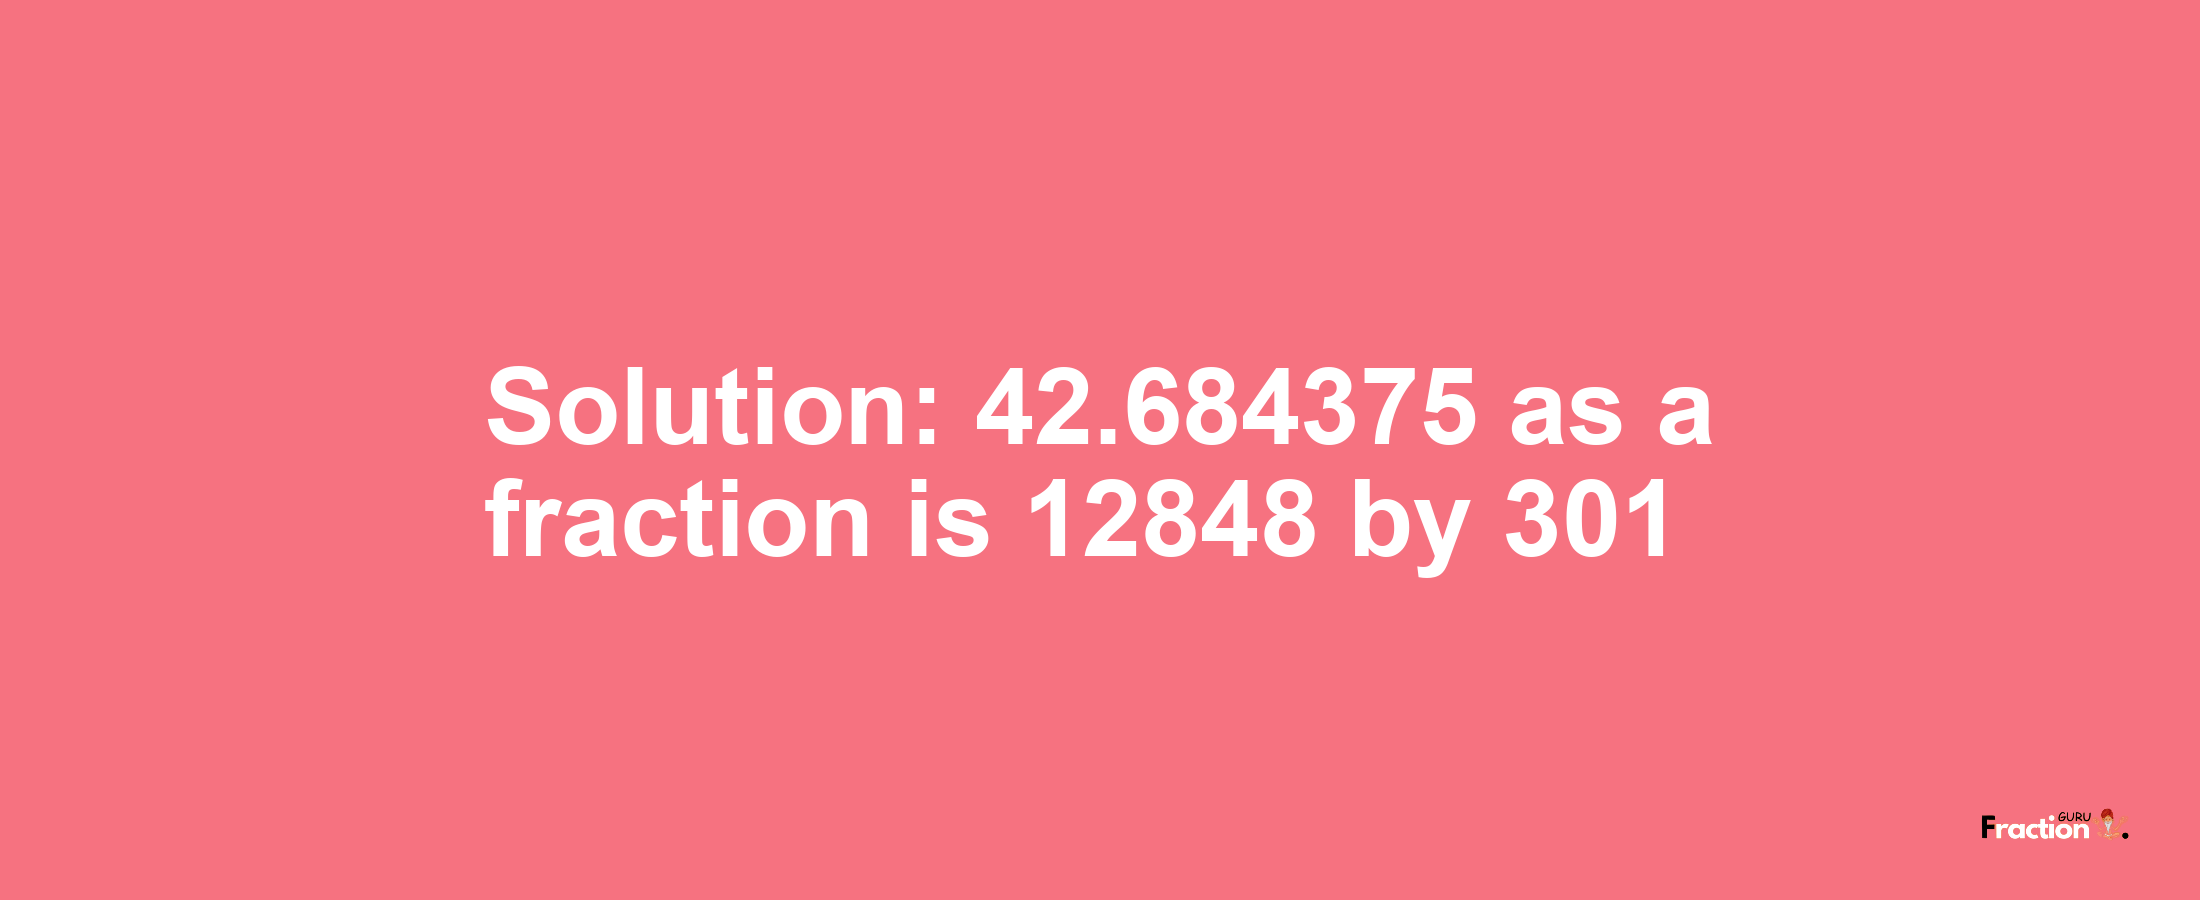 Solution:42.684375 as a fraction is 12848/301